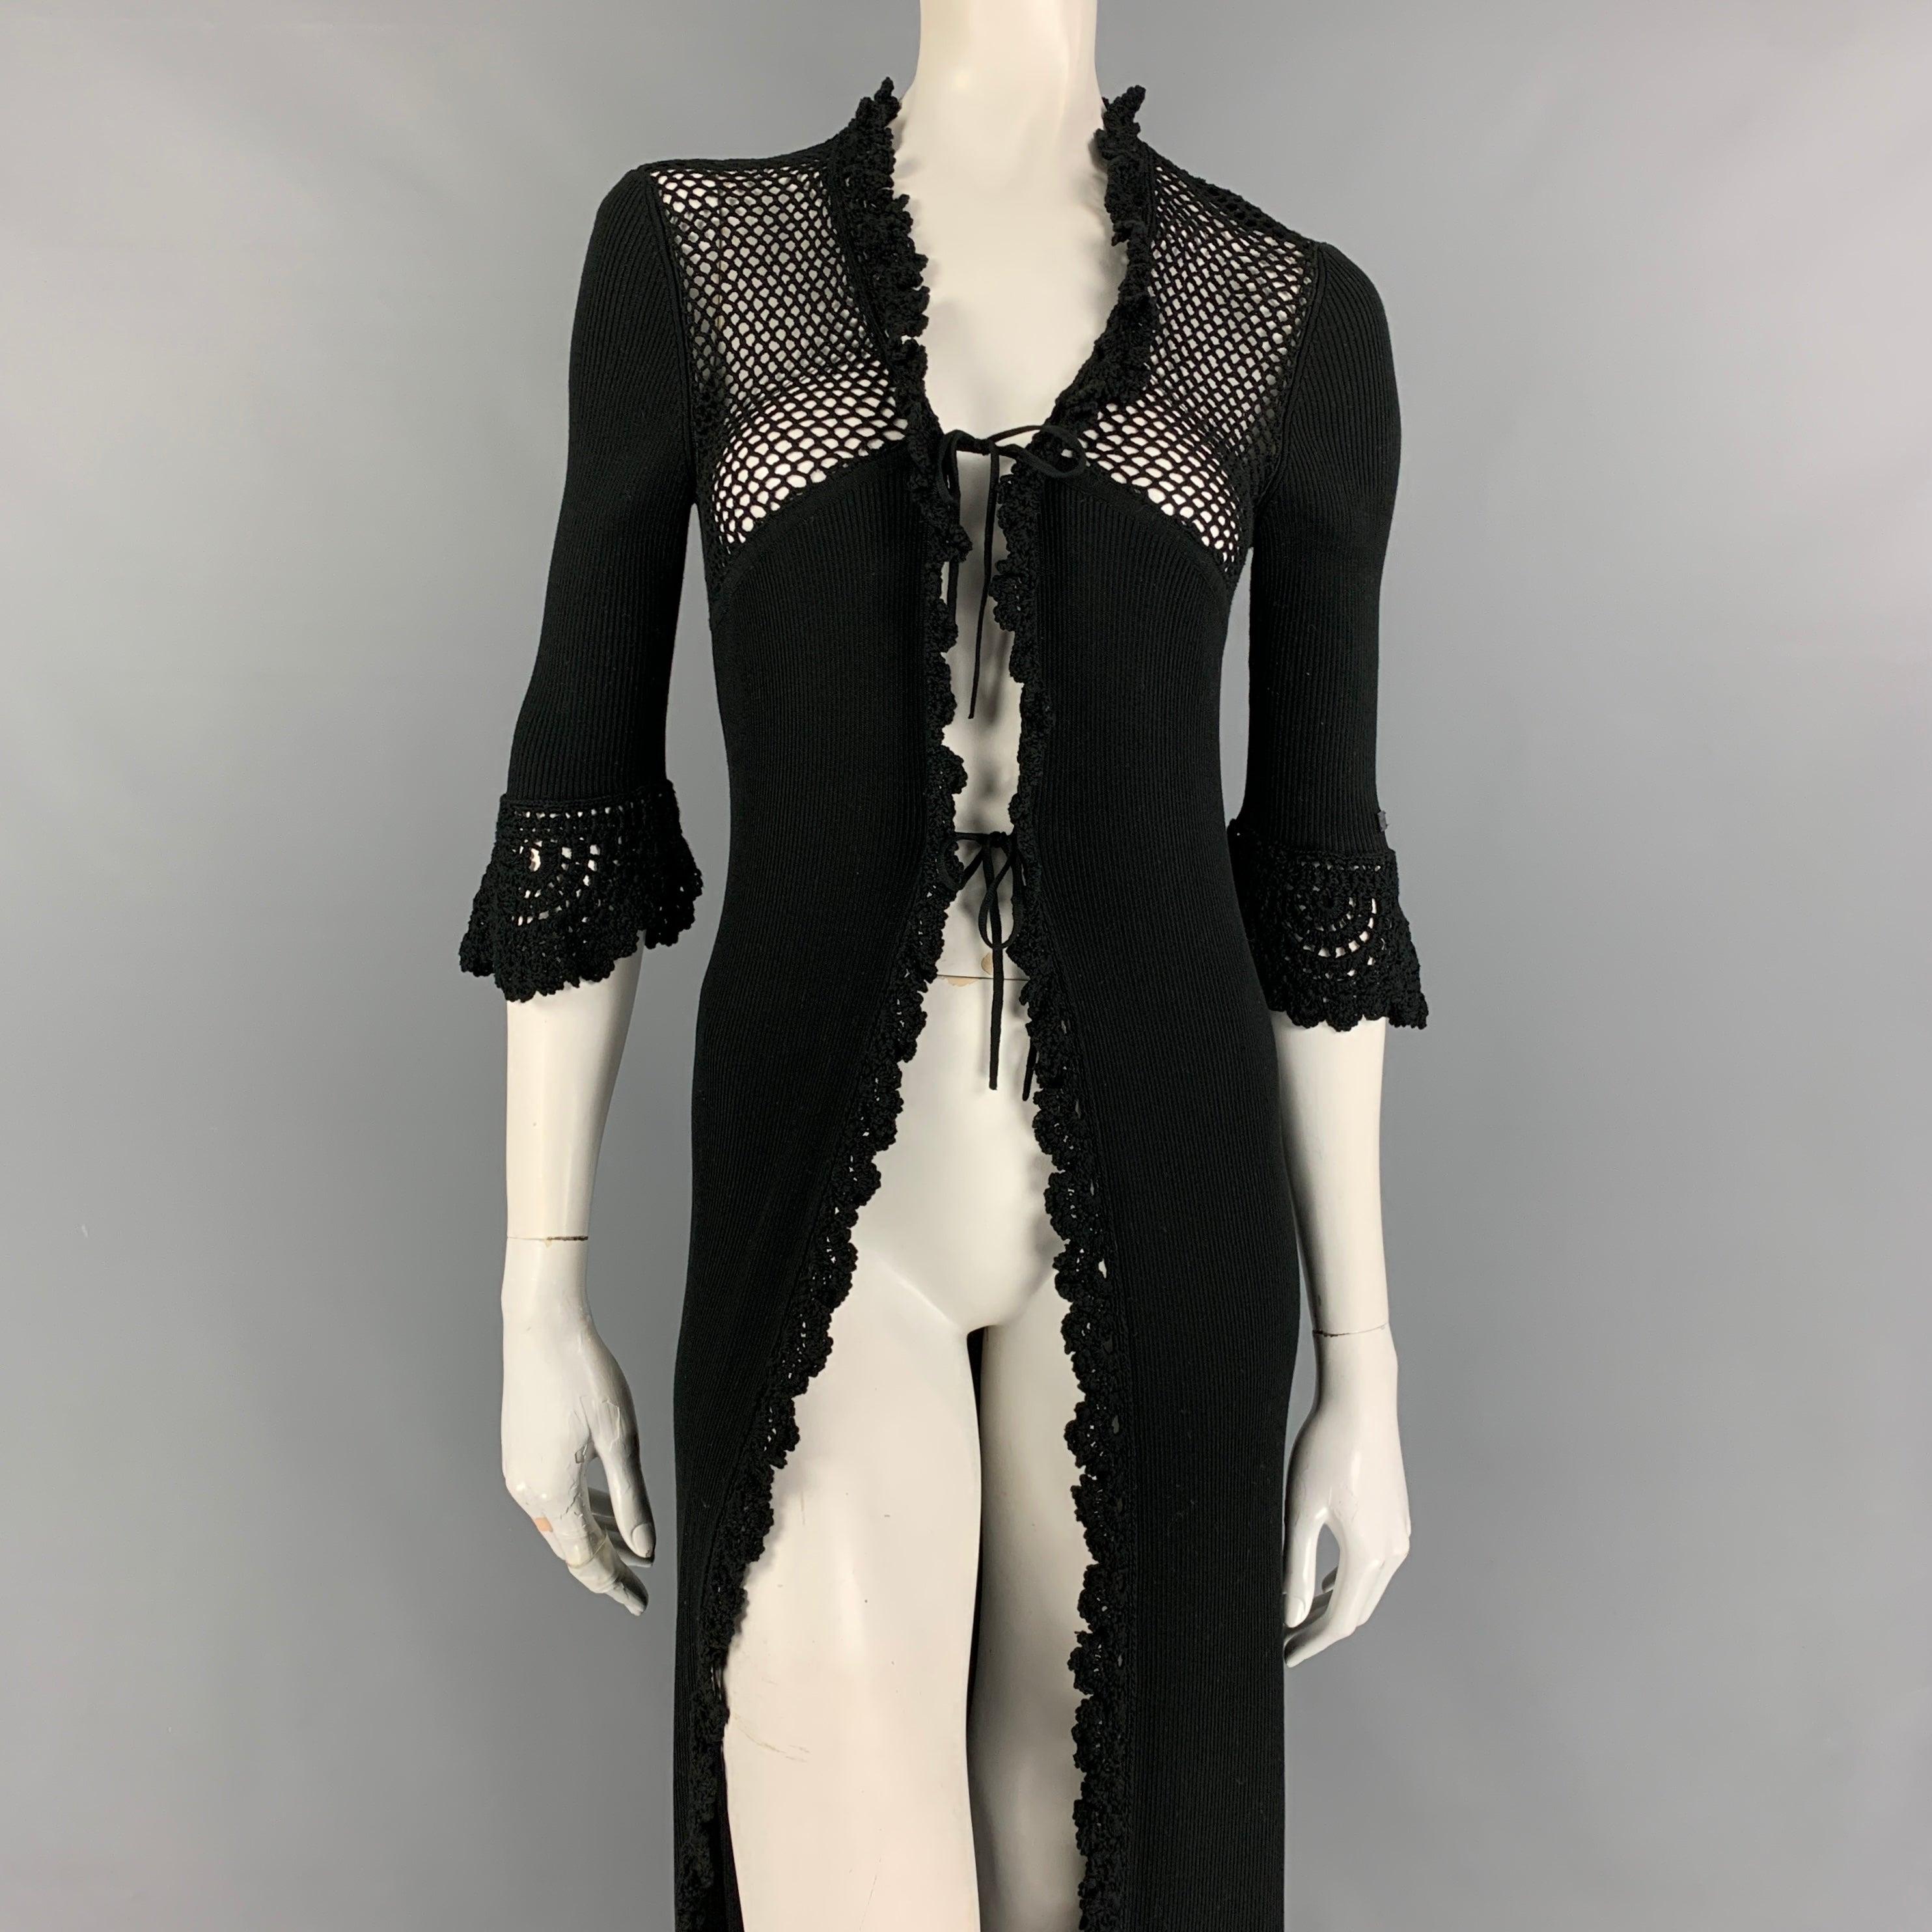 CHANEL 2003 cardigan comes in a black knitted cotton featuring crochet details, 3/4 sleeves, and a front double tie closure. Made in Italy.
Very Good Pre-Owned Condition. 

Marked:   42 

Measurements: 
 
Shoulder: 15.5 inches  Bust: 30 inches 